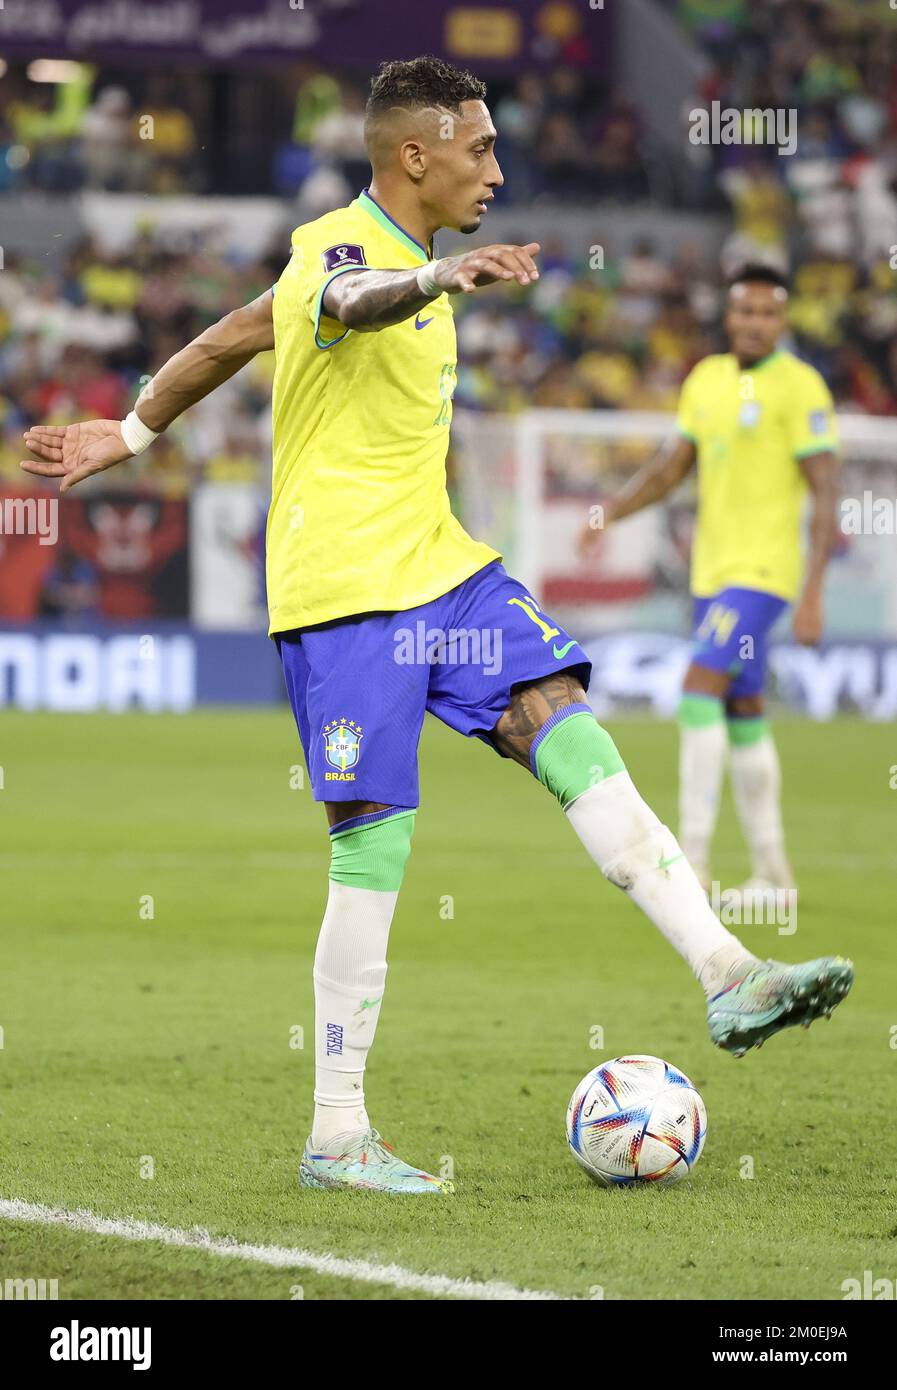 https://c8.alamy.com/comp/2M0EJ9A/raphinha-of-brazil-during-the-fifa-world-cup-2022-round-of-16-football-match-between-brazil-and-korea-republic-on-december-5-2022-at-stadium-974-in-doha-qatar-photo-jean-catuffedppilivemedia-2M0EJ9A.jpg